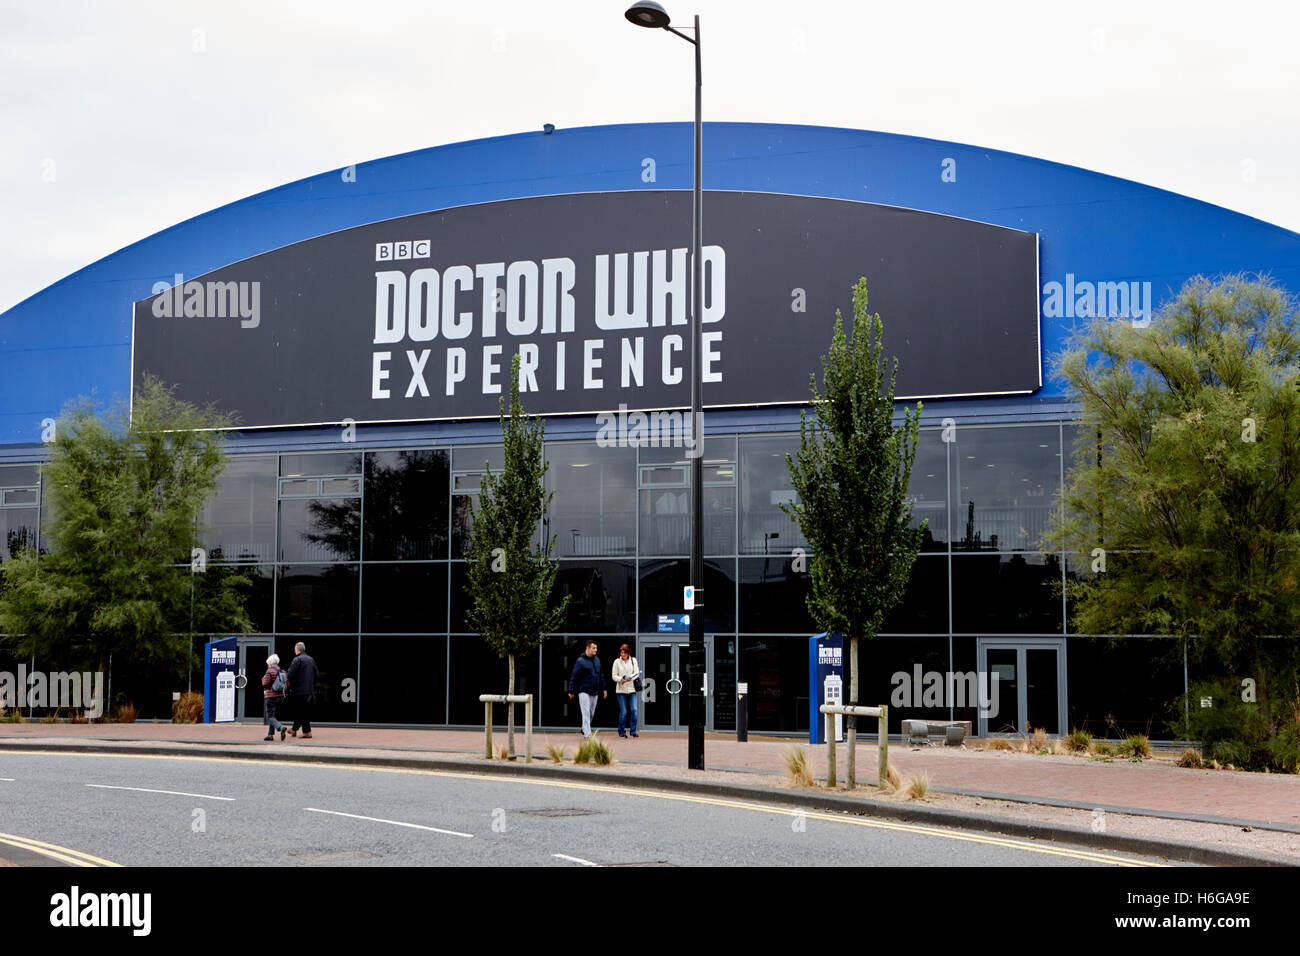 The BBC doctor who experience Cardiff bay Wales United Kingdom Stock Photo